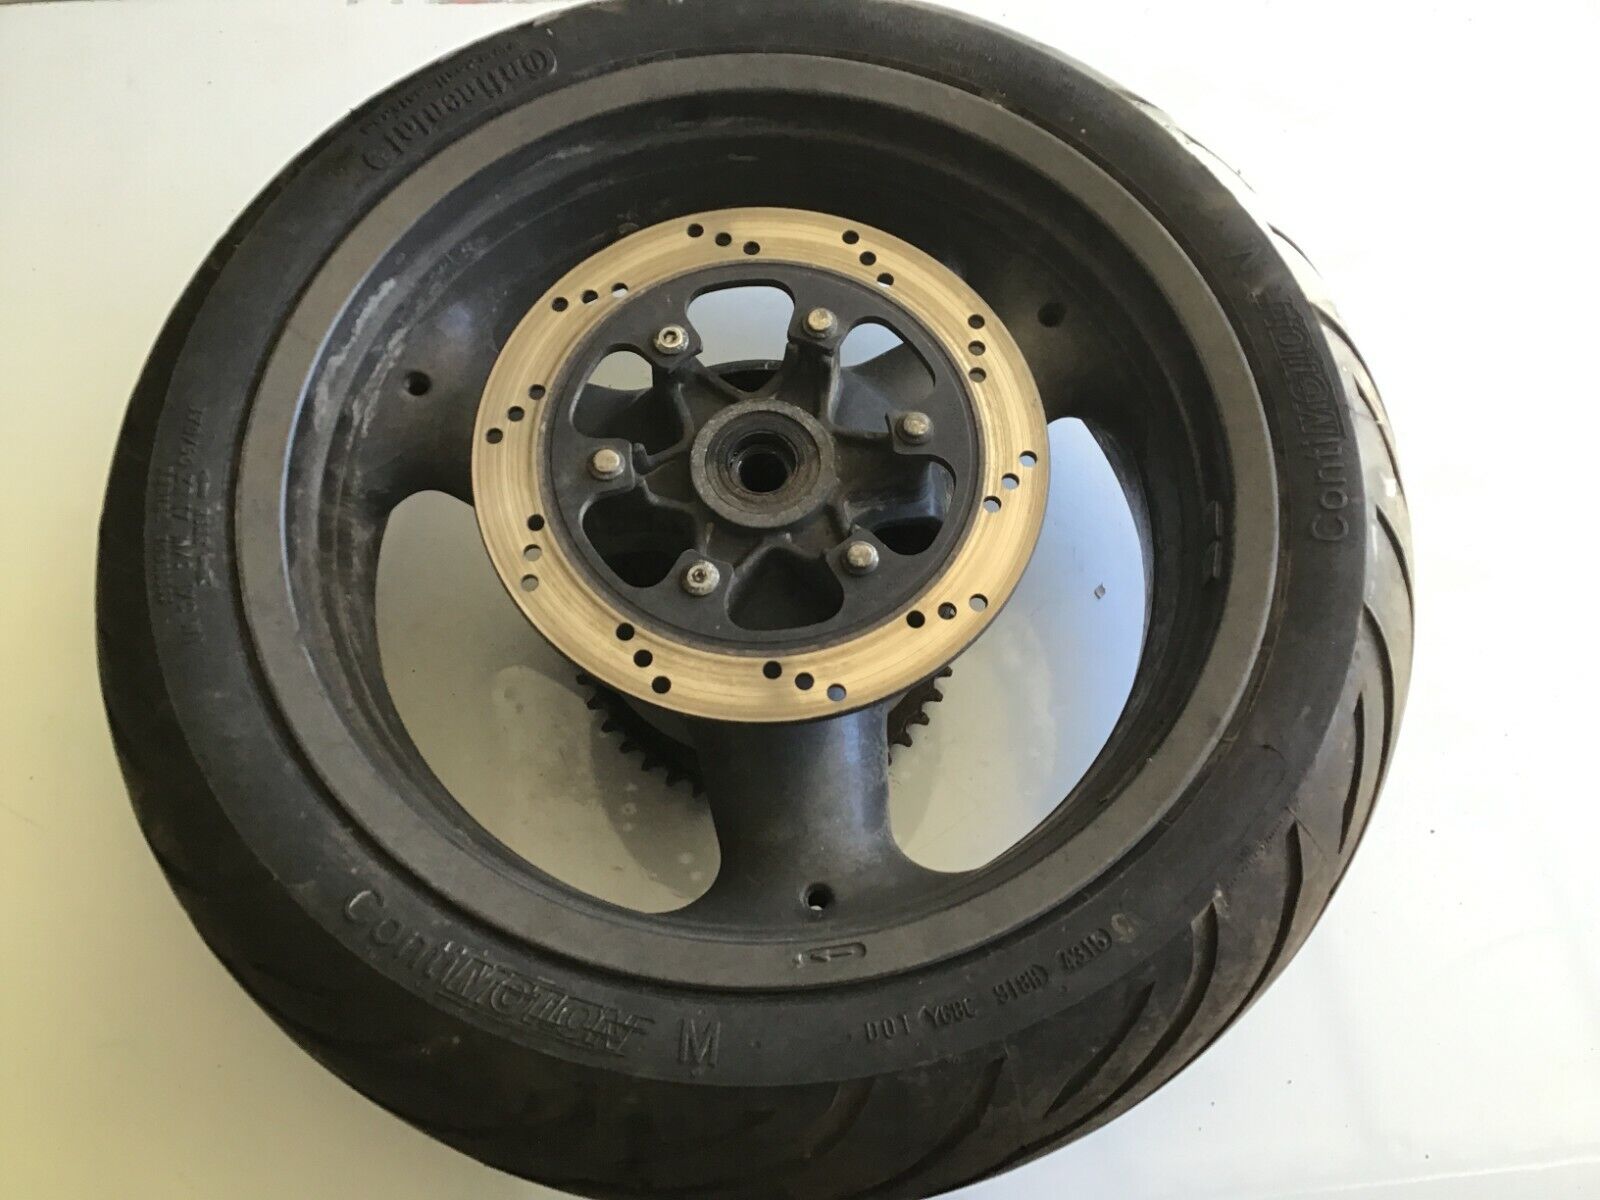 1995 Triumph Sprint 900 Rear Wheel Rim With Attached Sprocket and Brake Disc